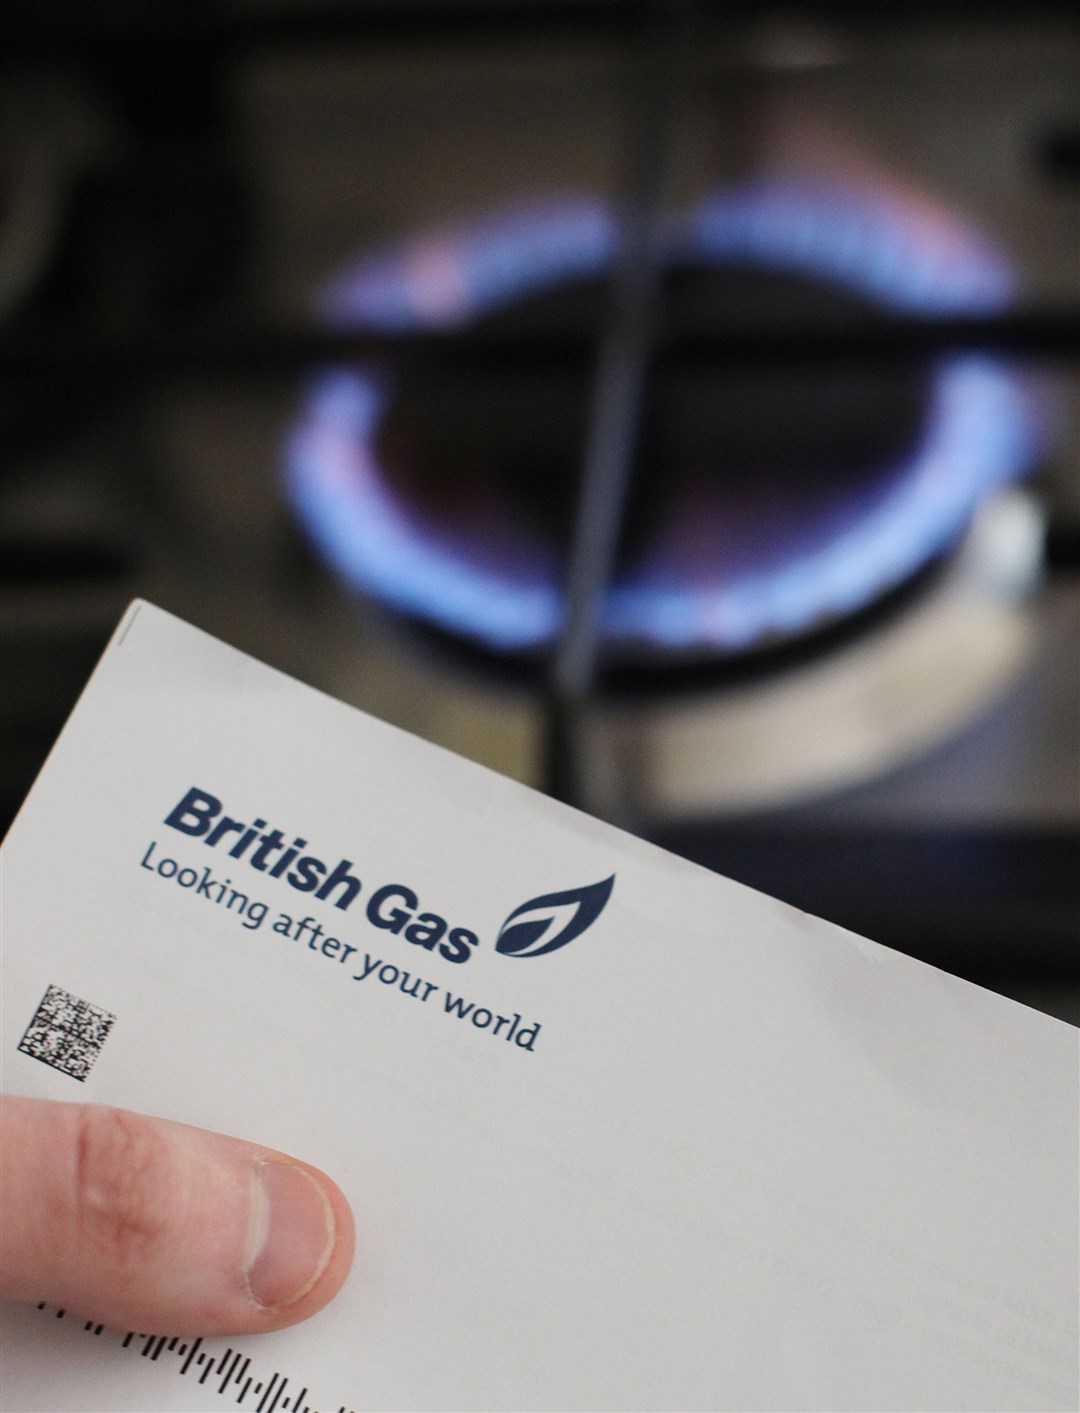 British Gas and its parent company Centrica are under pressure to compensate ‘mistreated’ customers (Katie Collins/PA)